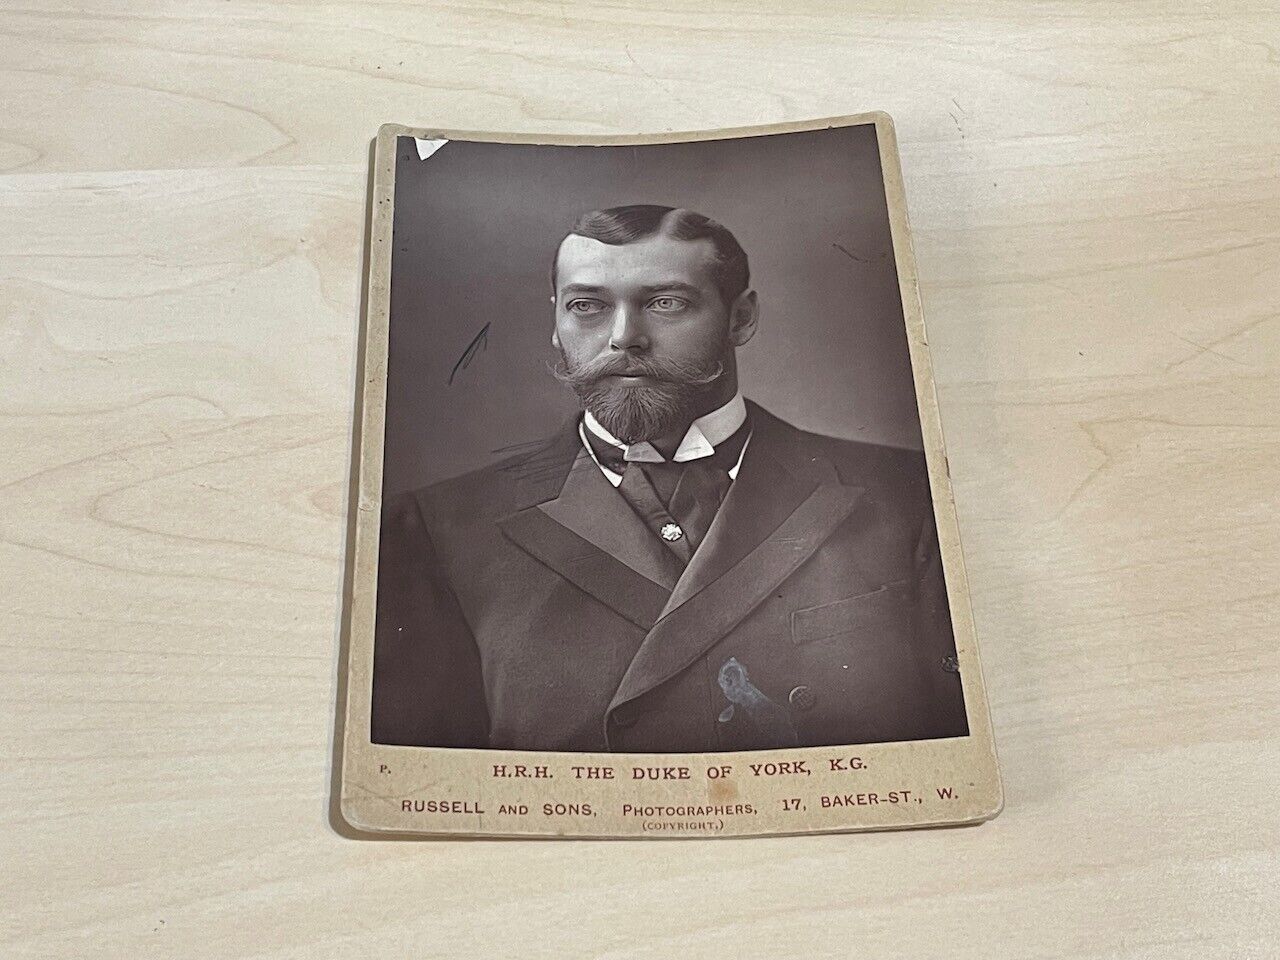 Antique Cabinet Card Photograph H.R.H. The Duke of York by Russell & Sons